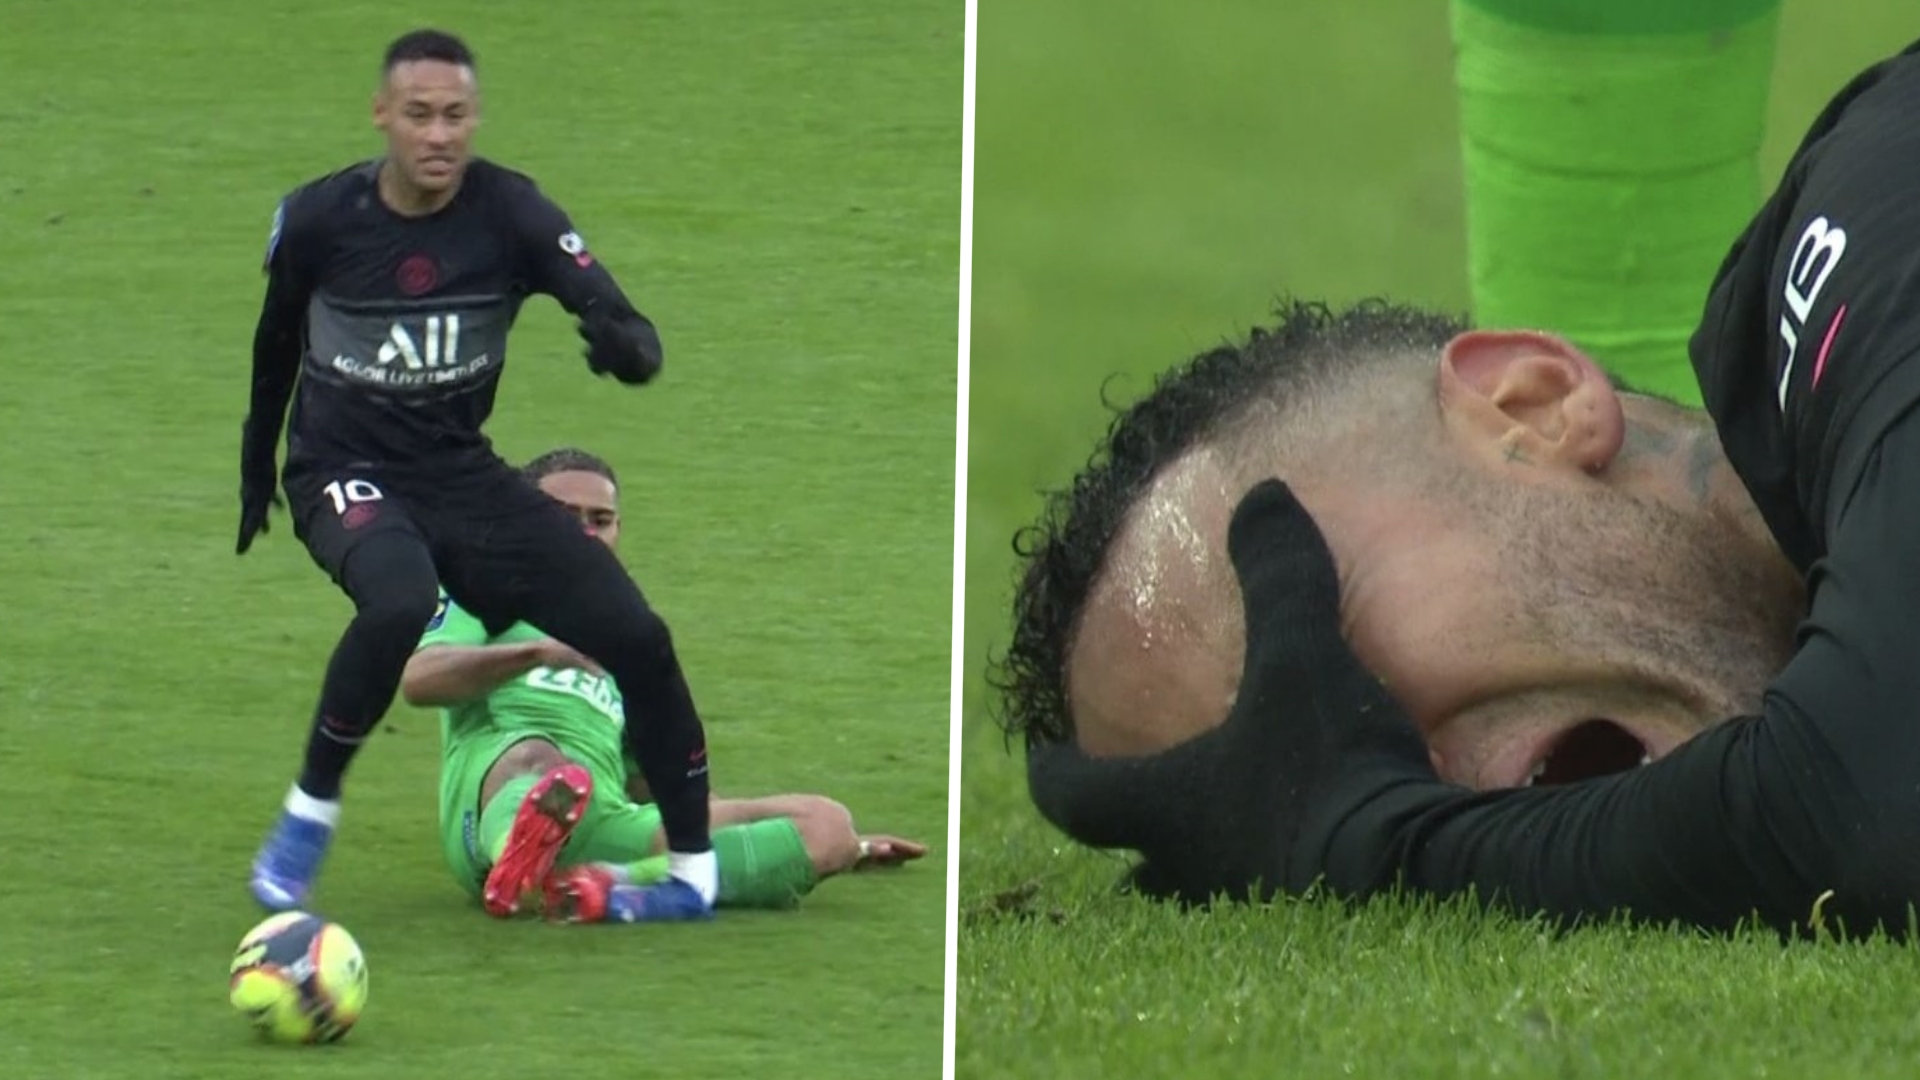 psg star neymar stretchered off after suffering horror ankle injury in saint etienne clash goal com